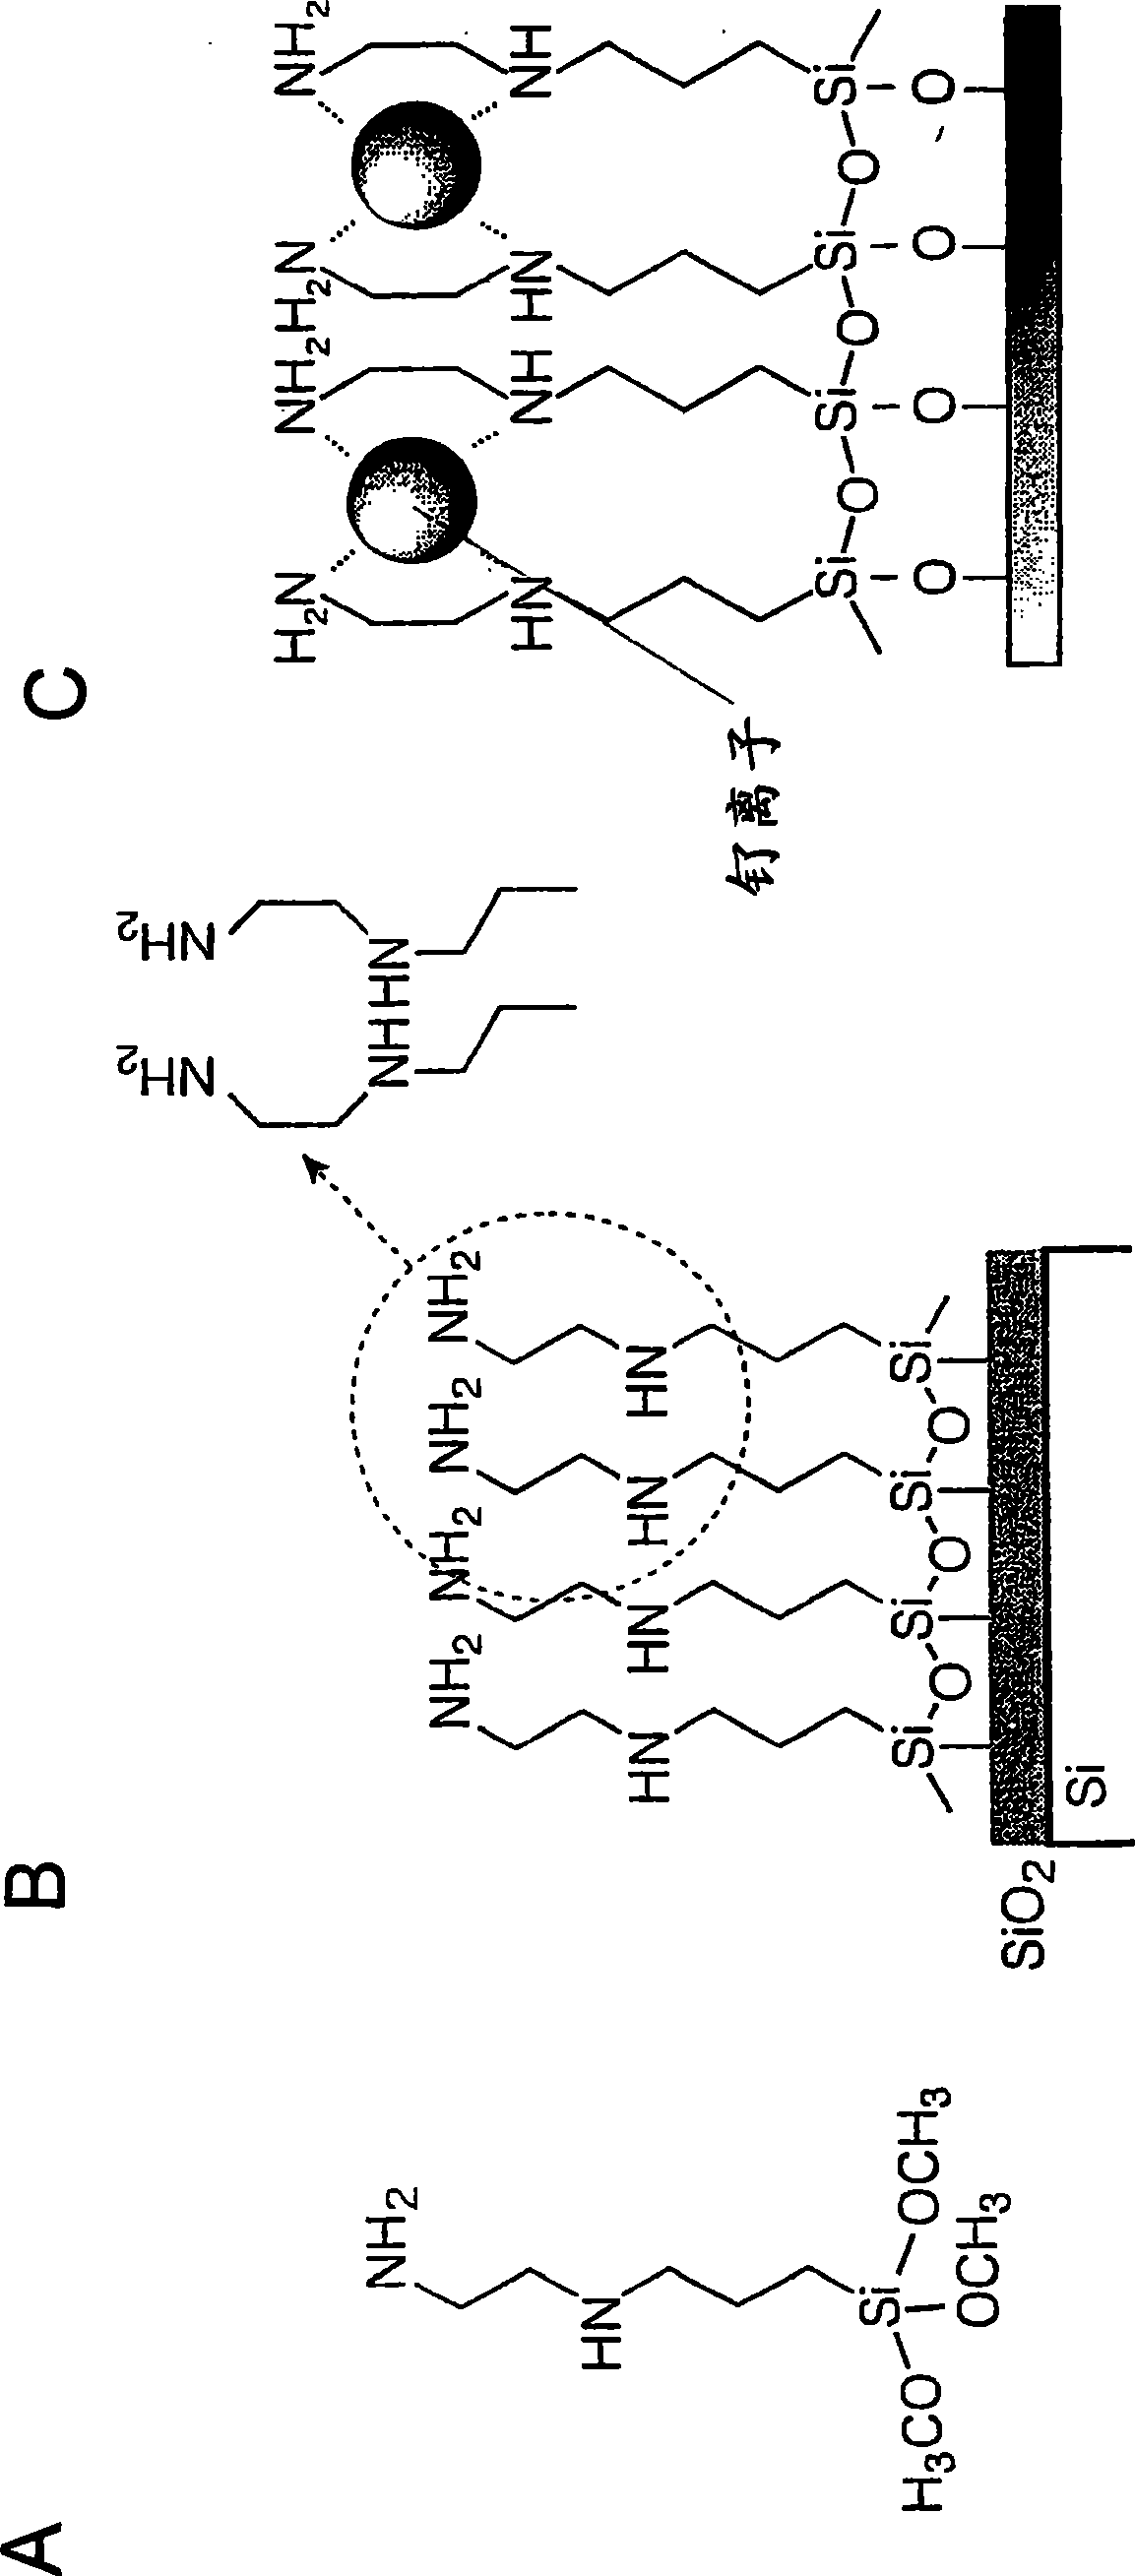 Electrochemically active organic thin film, method for producing the same, and device using the same